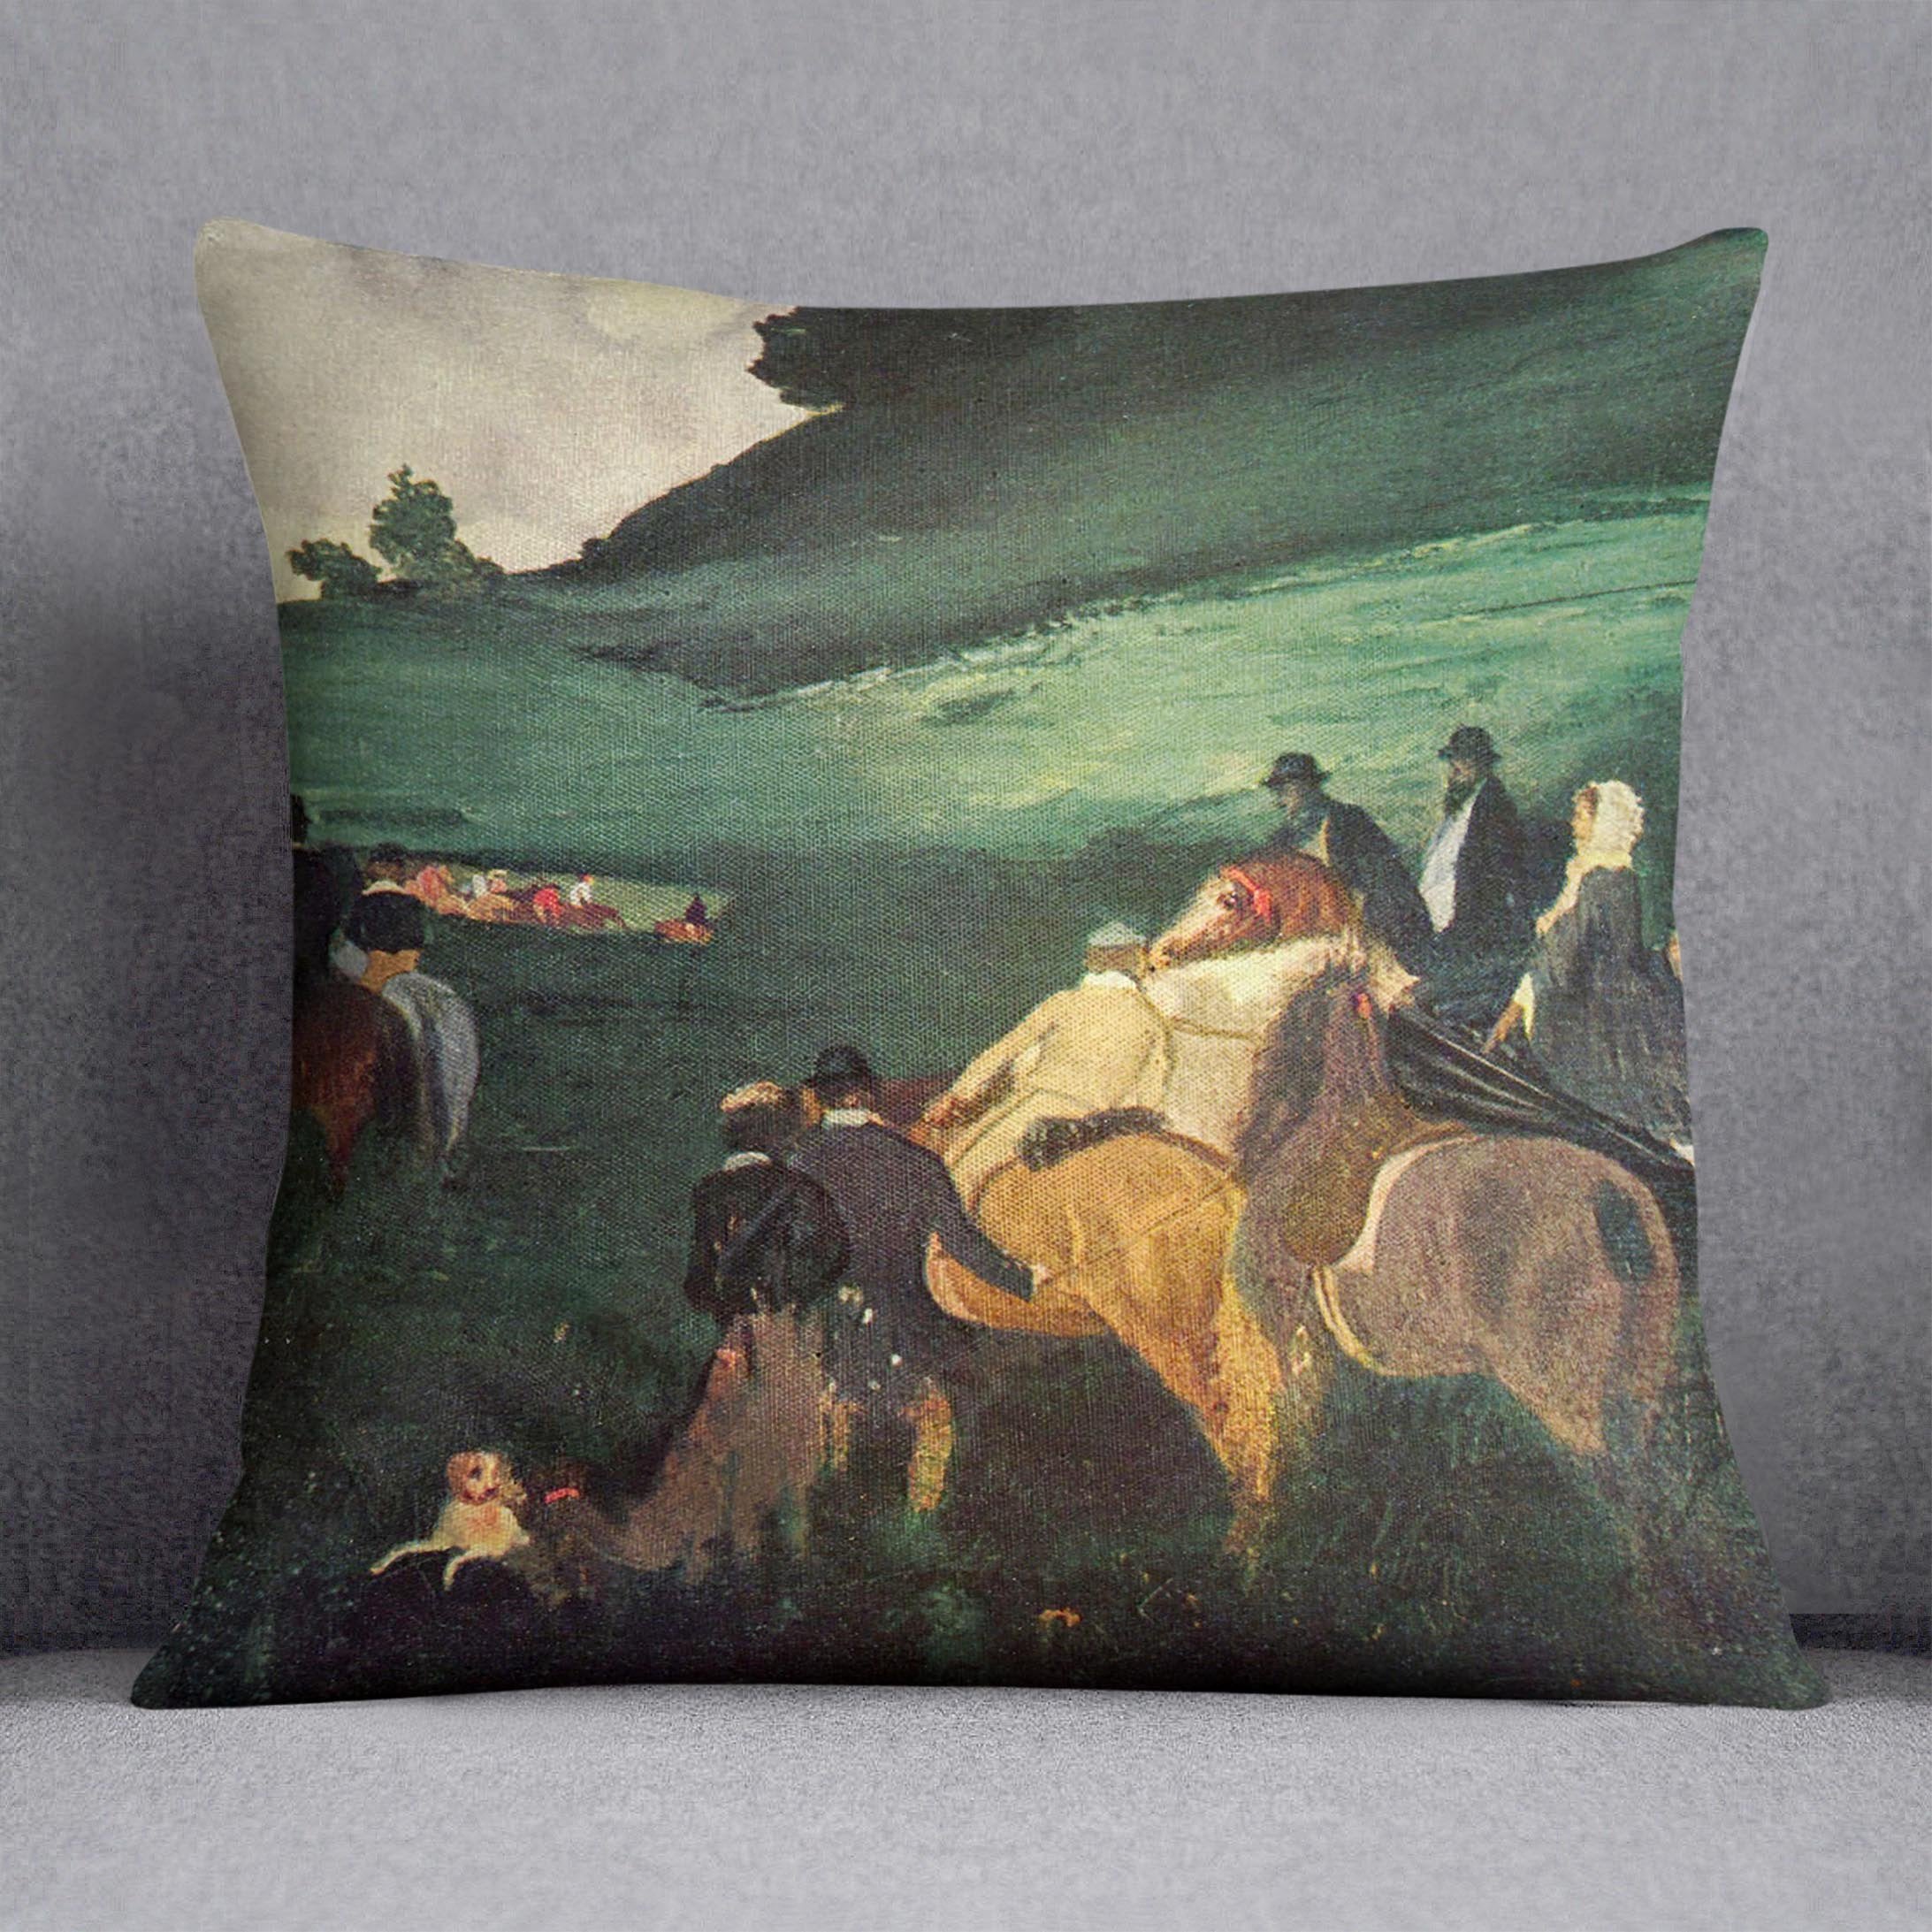 Riders in the landscape by Degas Cushion